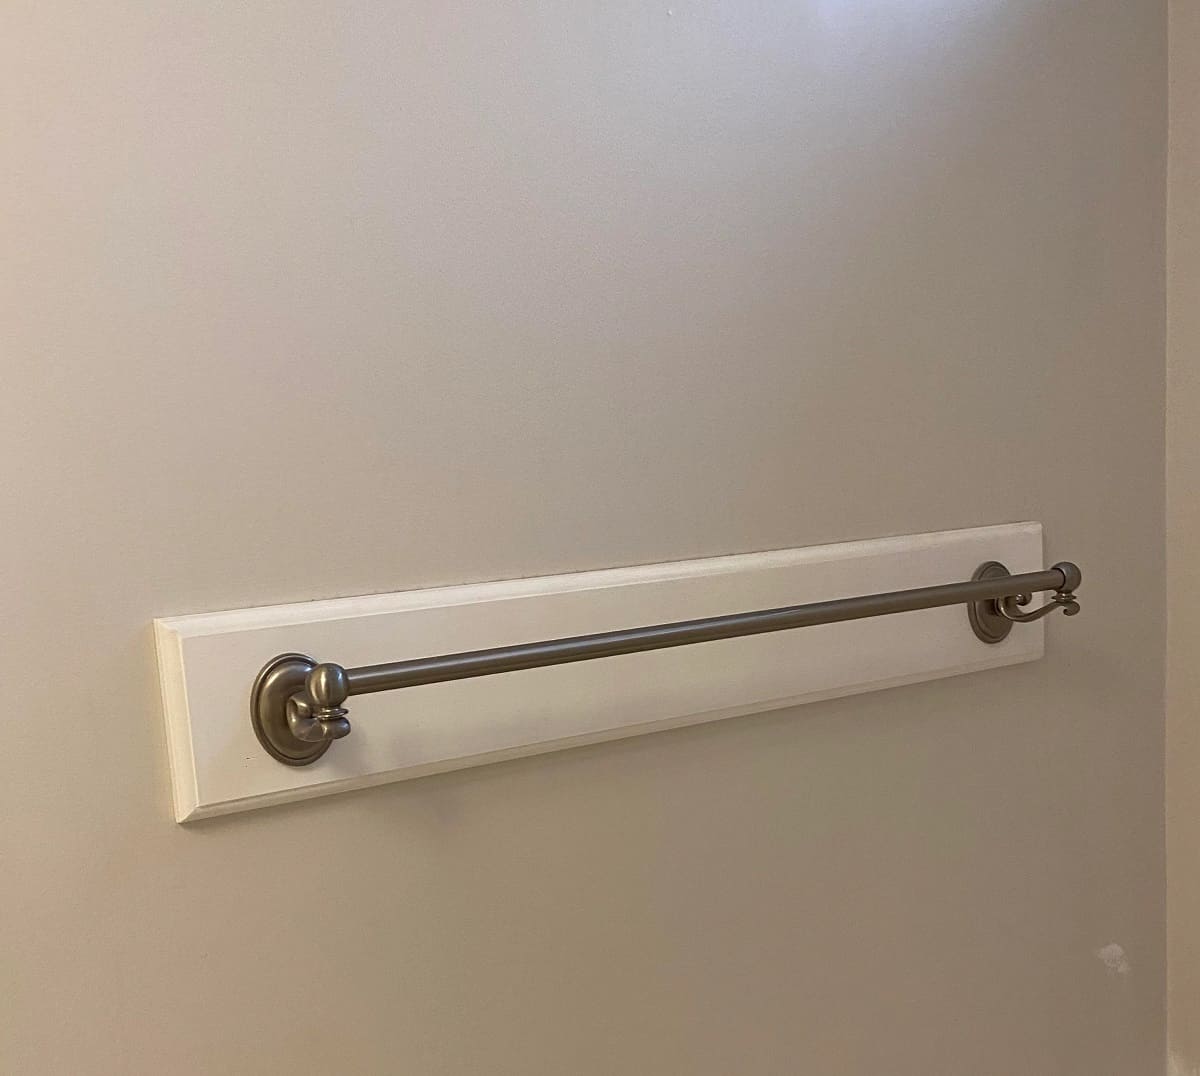 What To Use To Mount Towel Bar Into Drywall